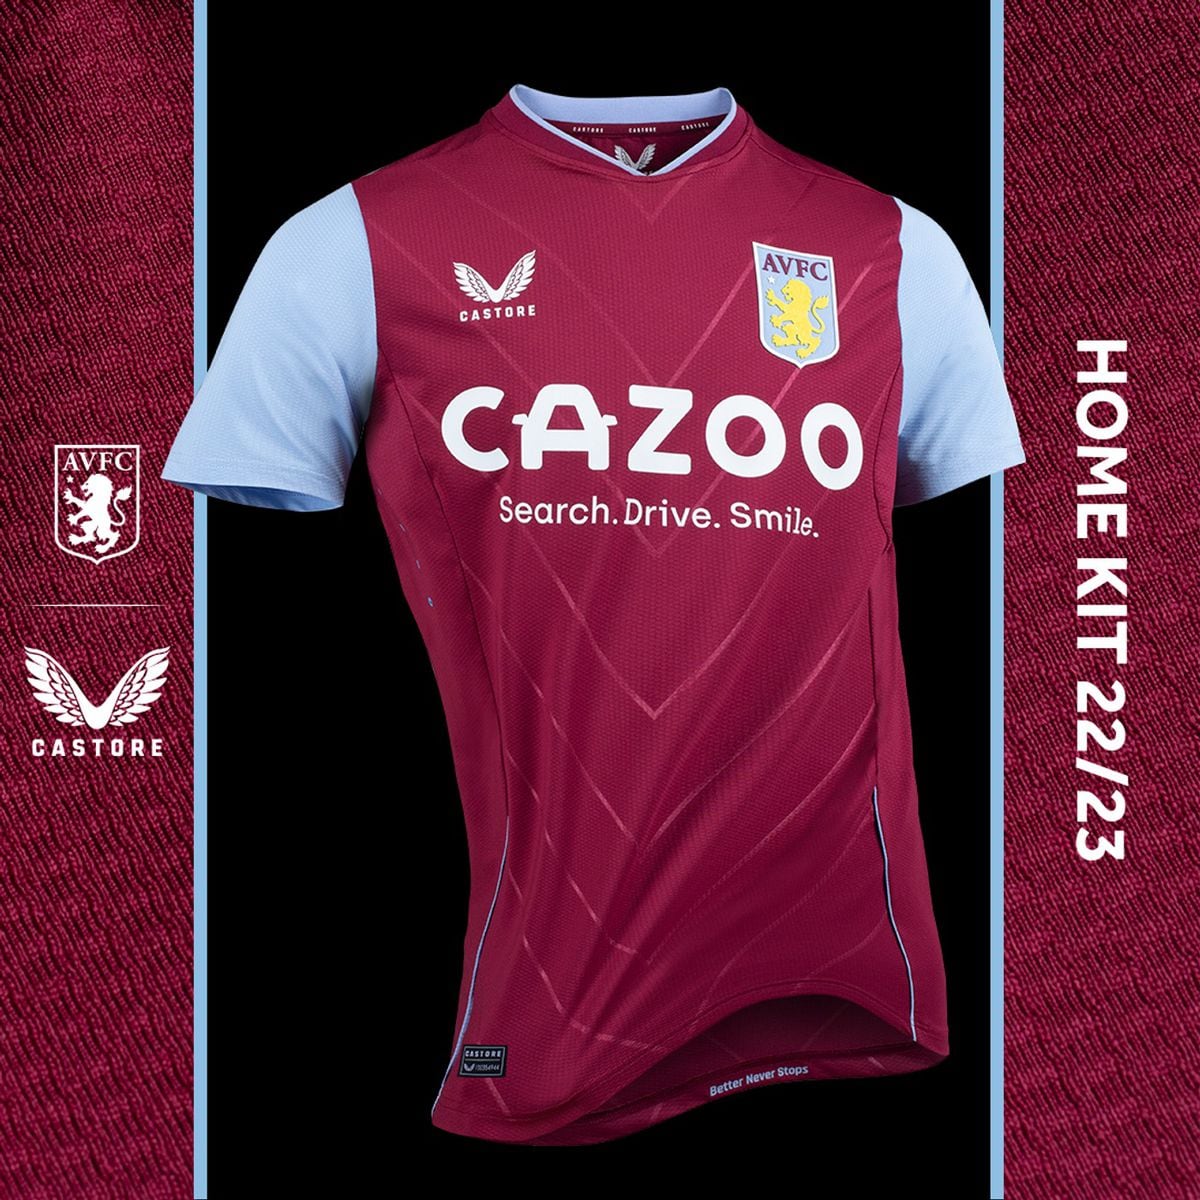 Sweatgate! Why Aston Villa are terminating Castore kit deal early - just  like Newcastle did